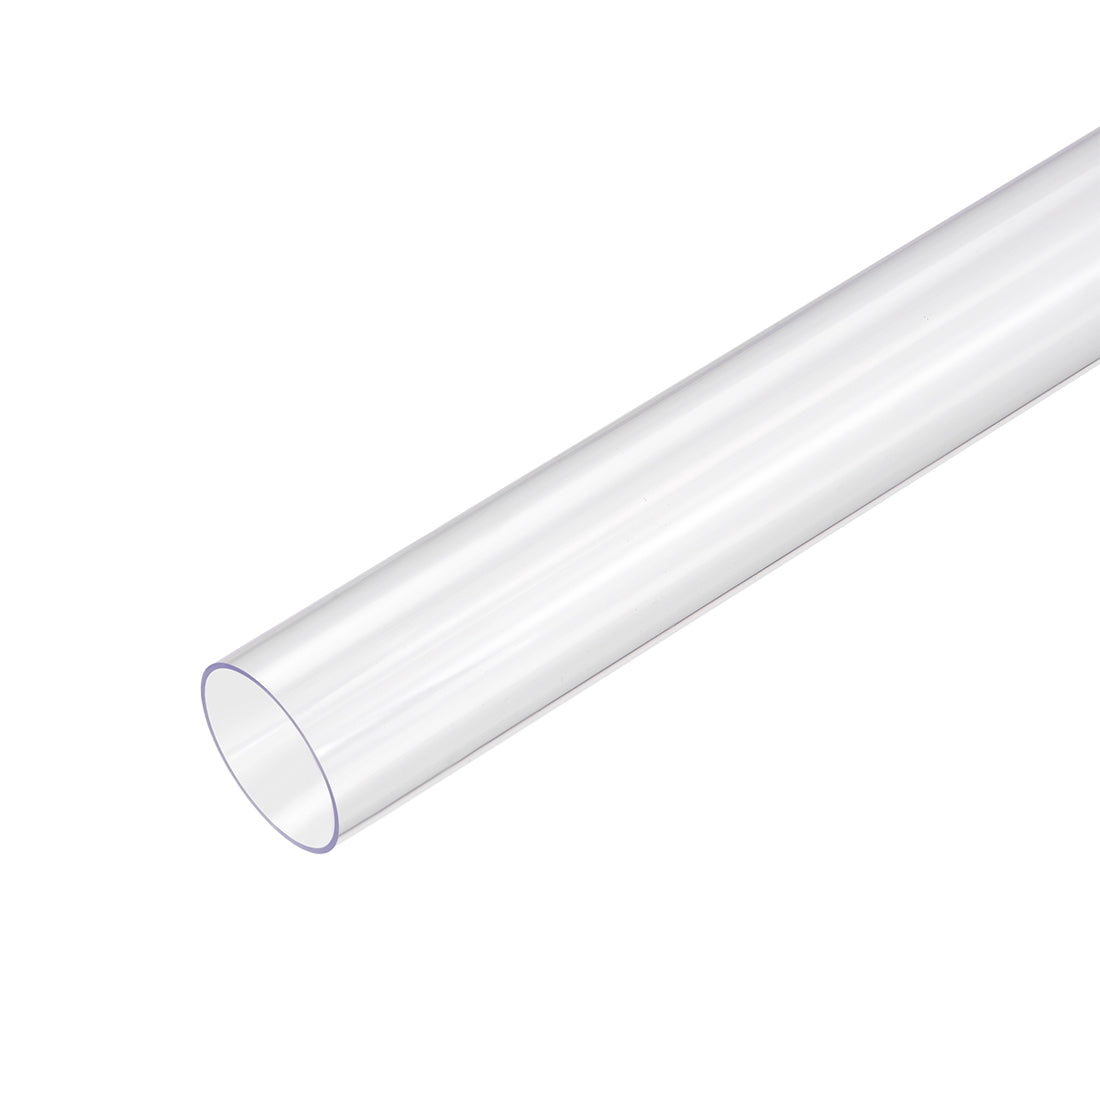 uxcell Uxcell PVC Rigid Round Tubing,Clear,23mm ID x 25mm OD,0.5M/1.64Ft Length